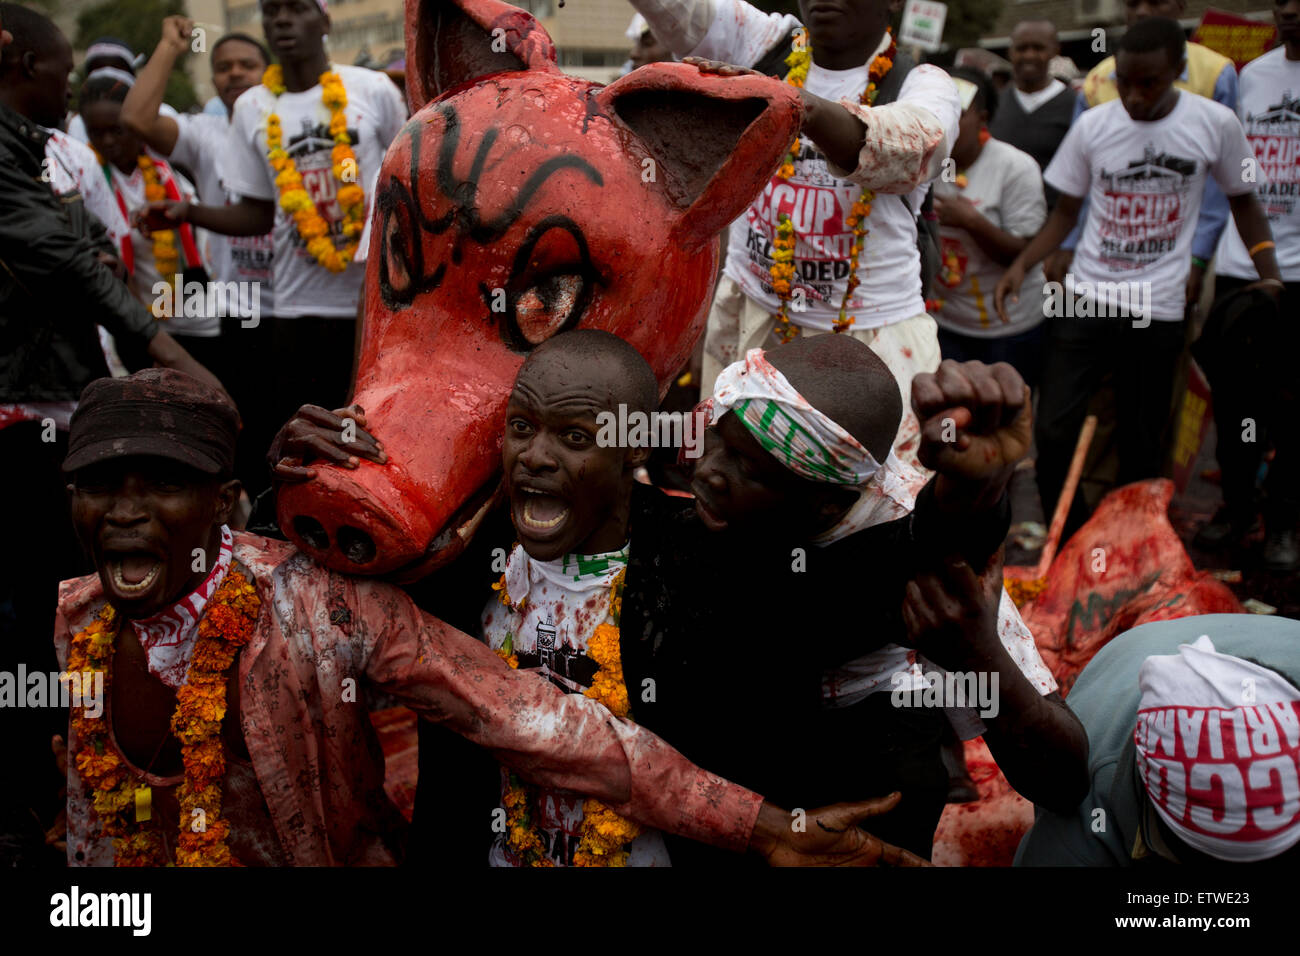 Kenyan protestors cover themselves with animal blood symbolising greed outside parliament during a protest over Members of Parliaments salaries, 11 June 2013 Kenyan MP's have voted to allow them a pay increase in defiance of proposals to cut pay. Kenyan MP's are already one of the higest paid in the world.The MP's voted  for a monthly salary of about $10,000 (£6,540).KAREL PRINSLOO. Stock Photo